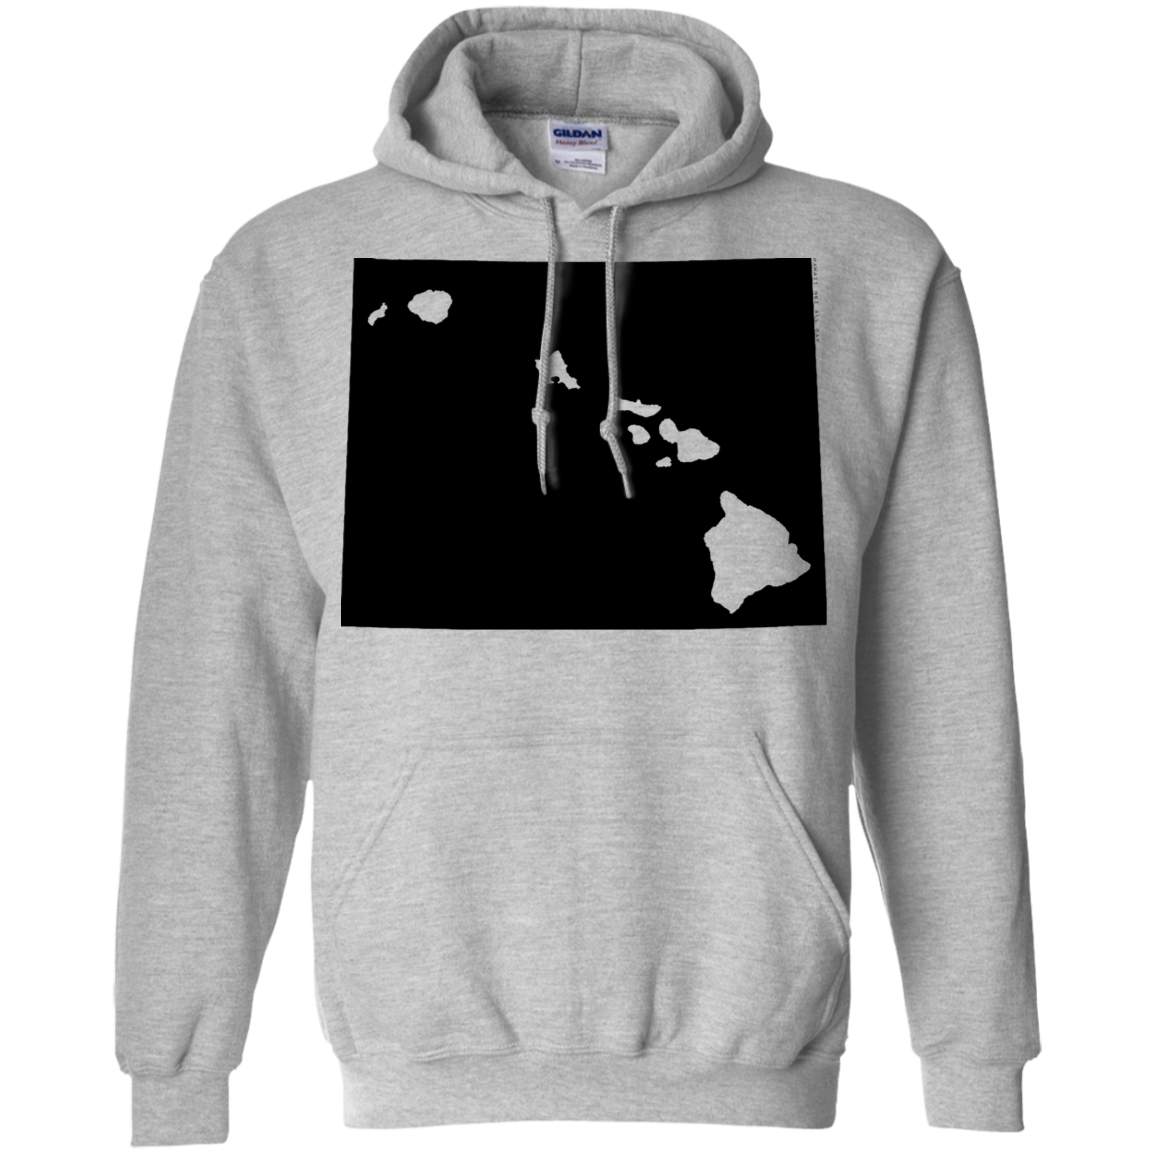 Living in Wyoming with Hawaii Roots Pullover Hoodie 8 oz., Sweatshirts, Hawaii Nei All Day